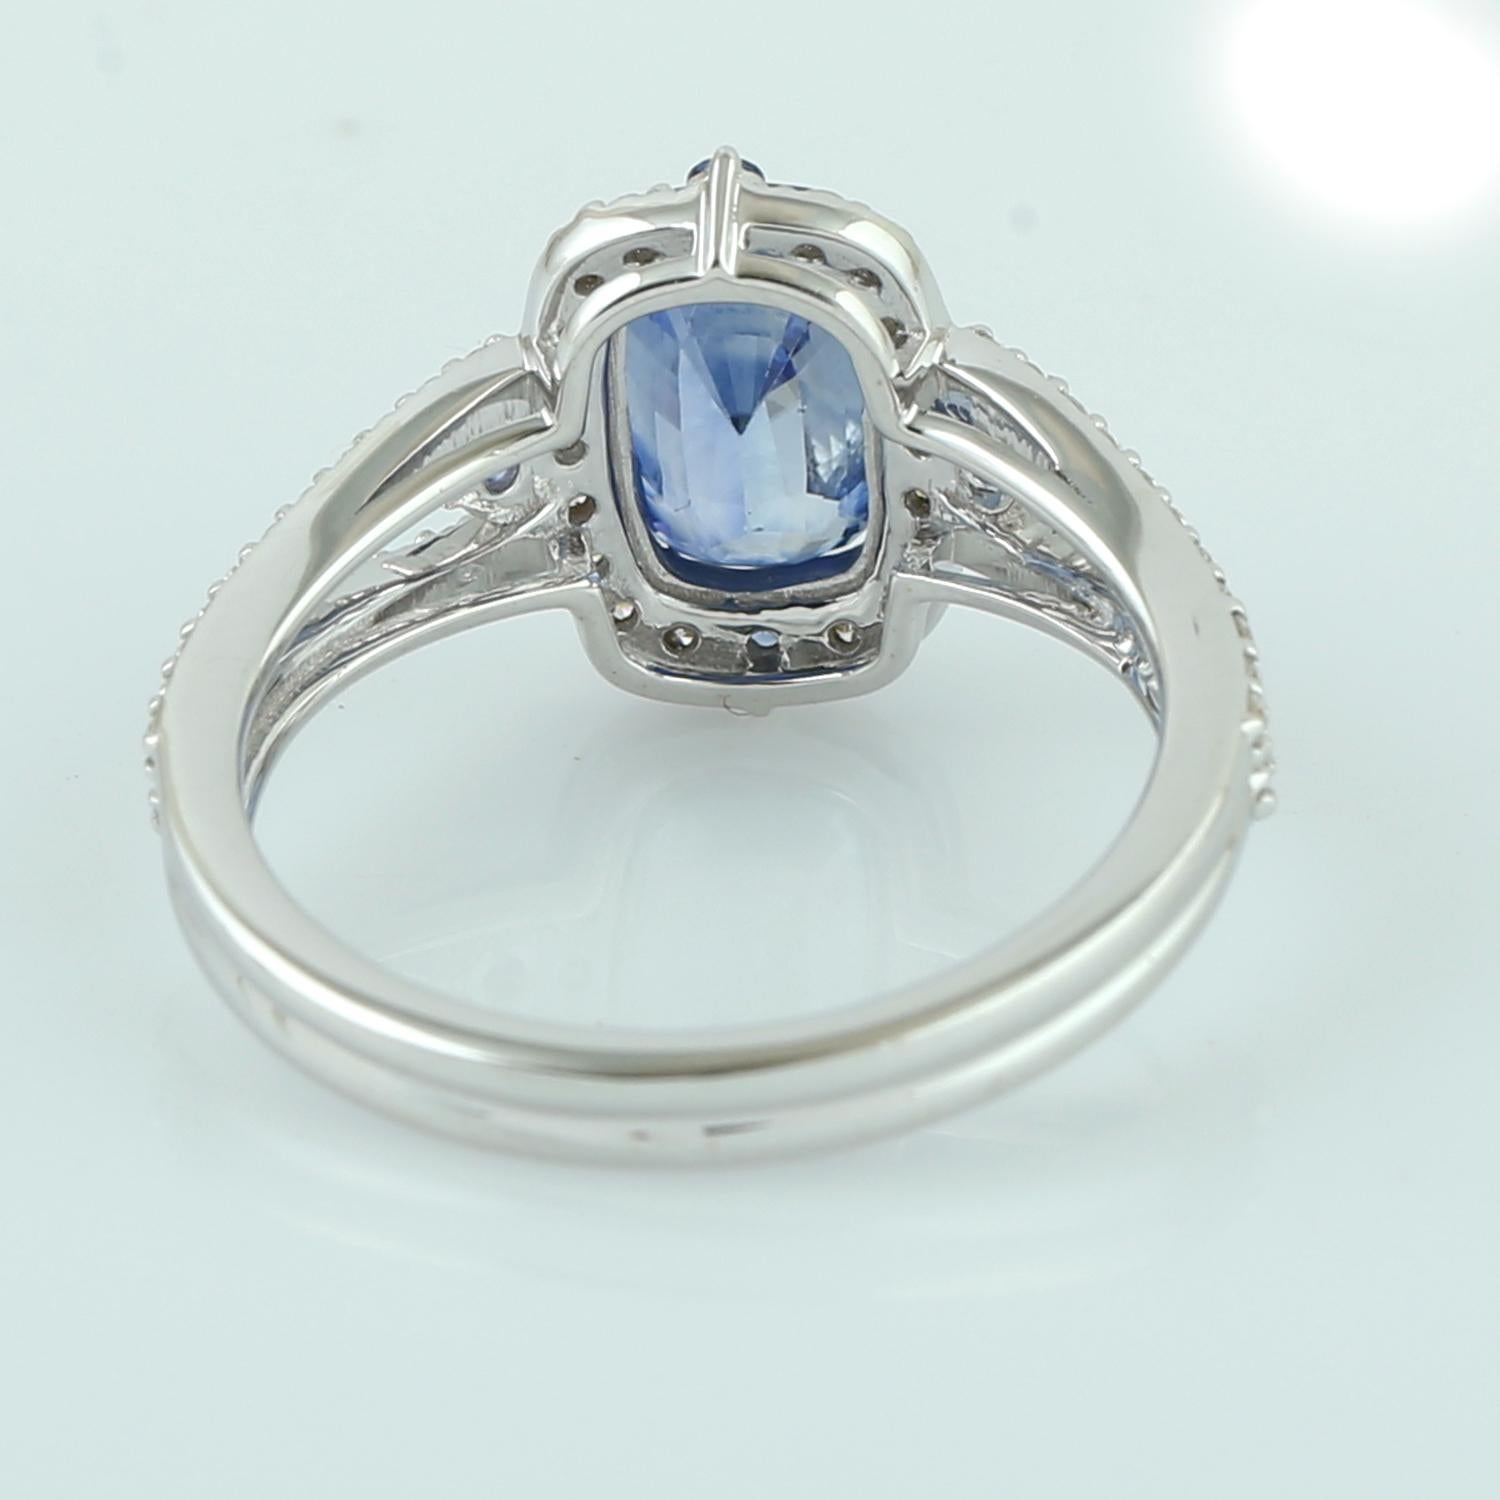 Women's Blue Sapphire Cocktail Ring With Pave Diamonds Made In 18k White Gold For Sale